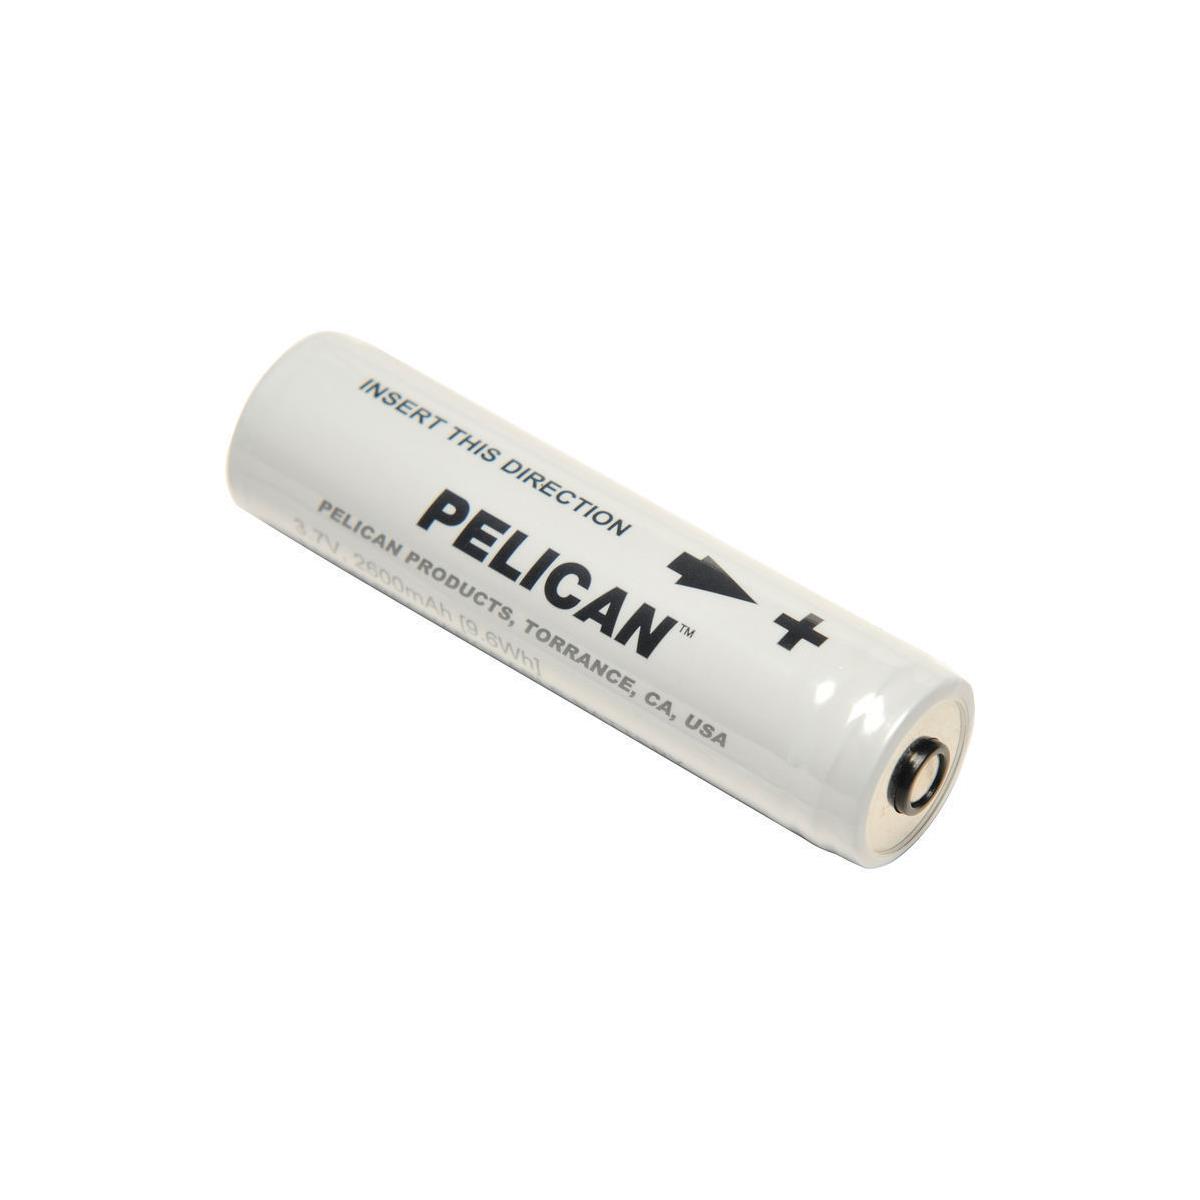 Pelican 18650 Rechargeable 3.7V 2600mAh Lithium-Ion Battery -  02380R-3010-001